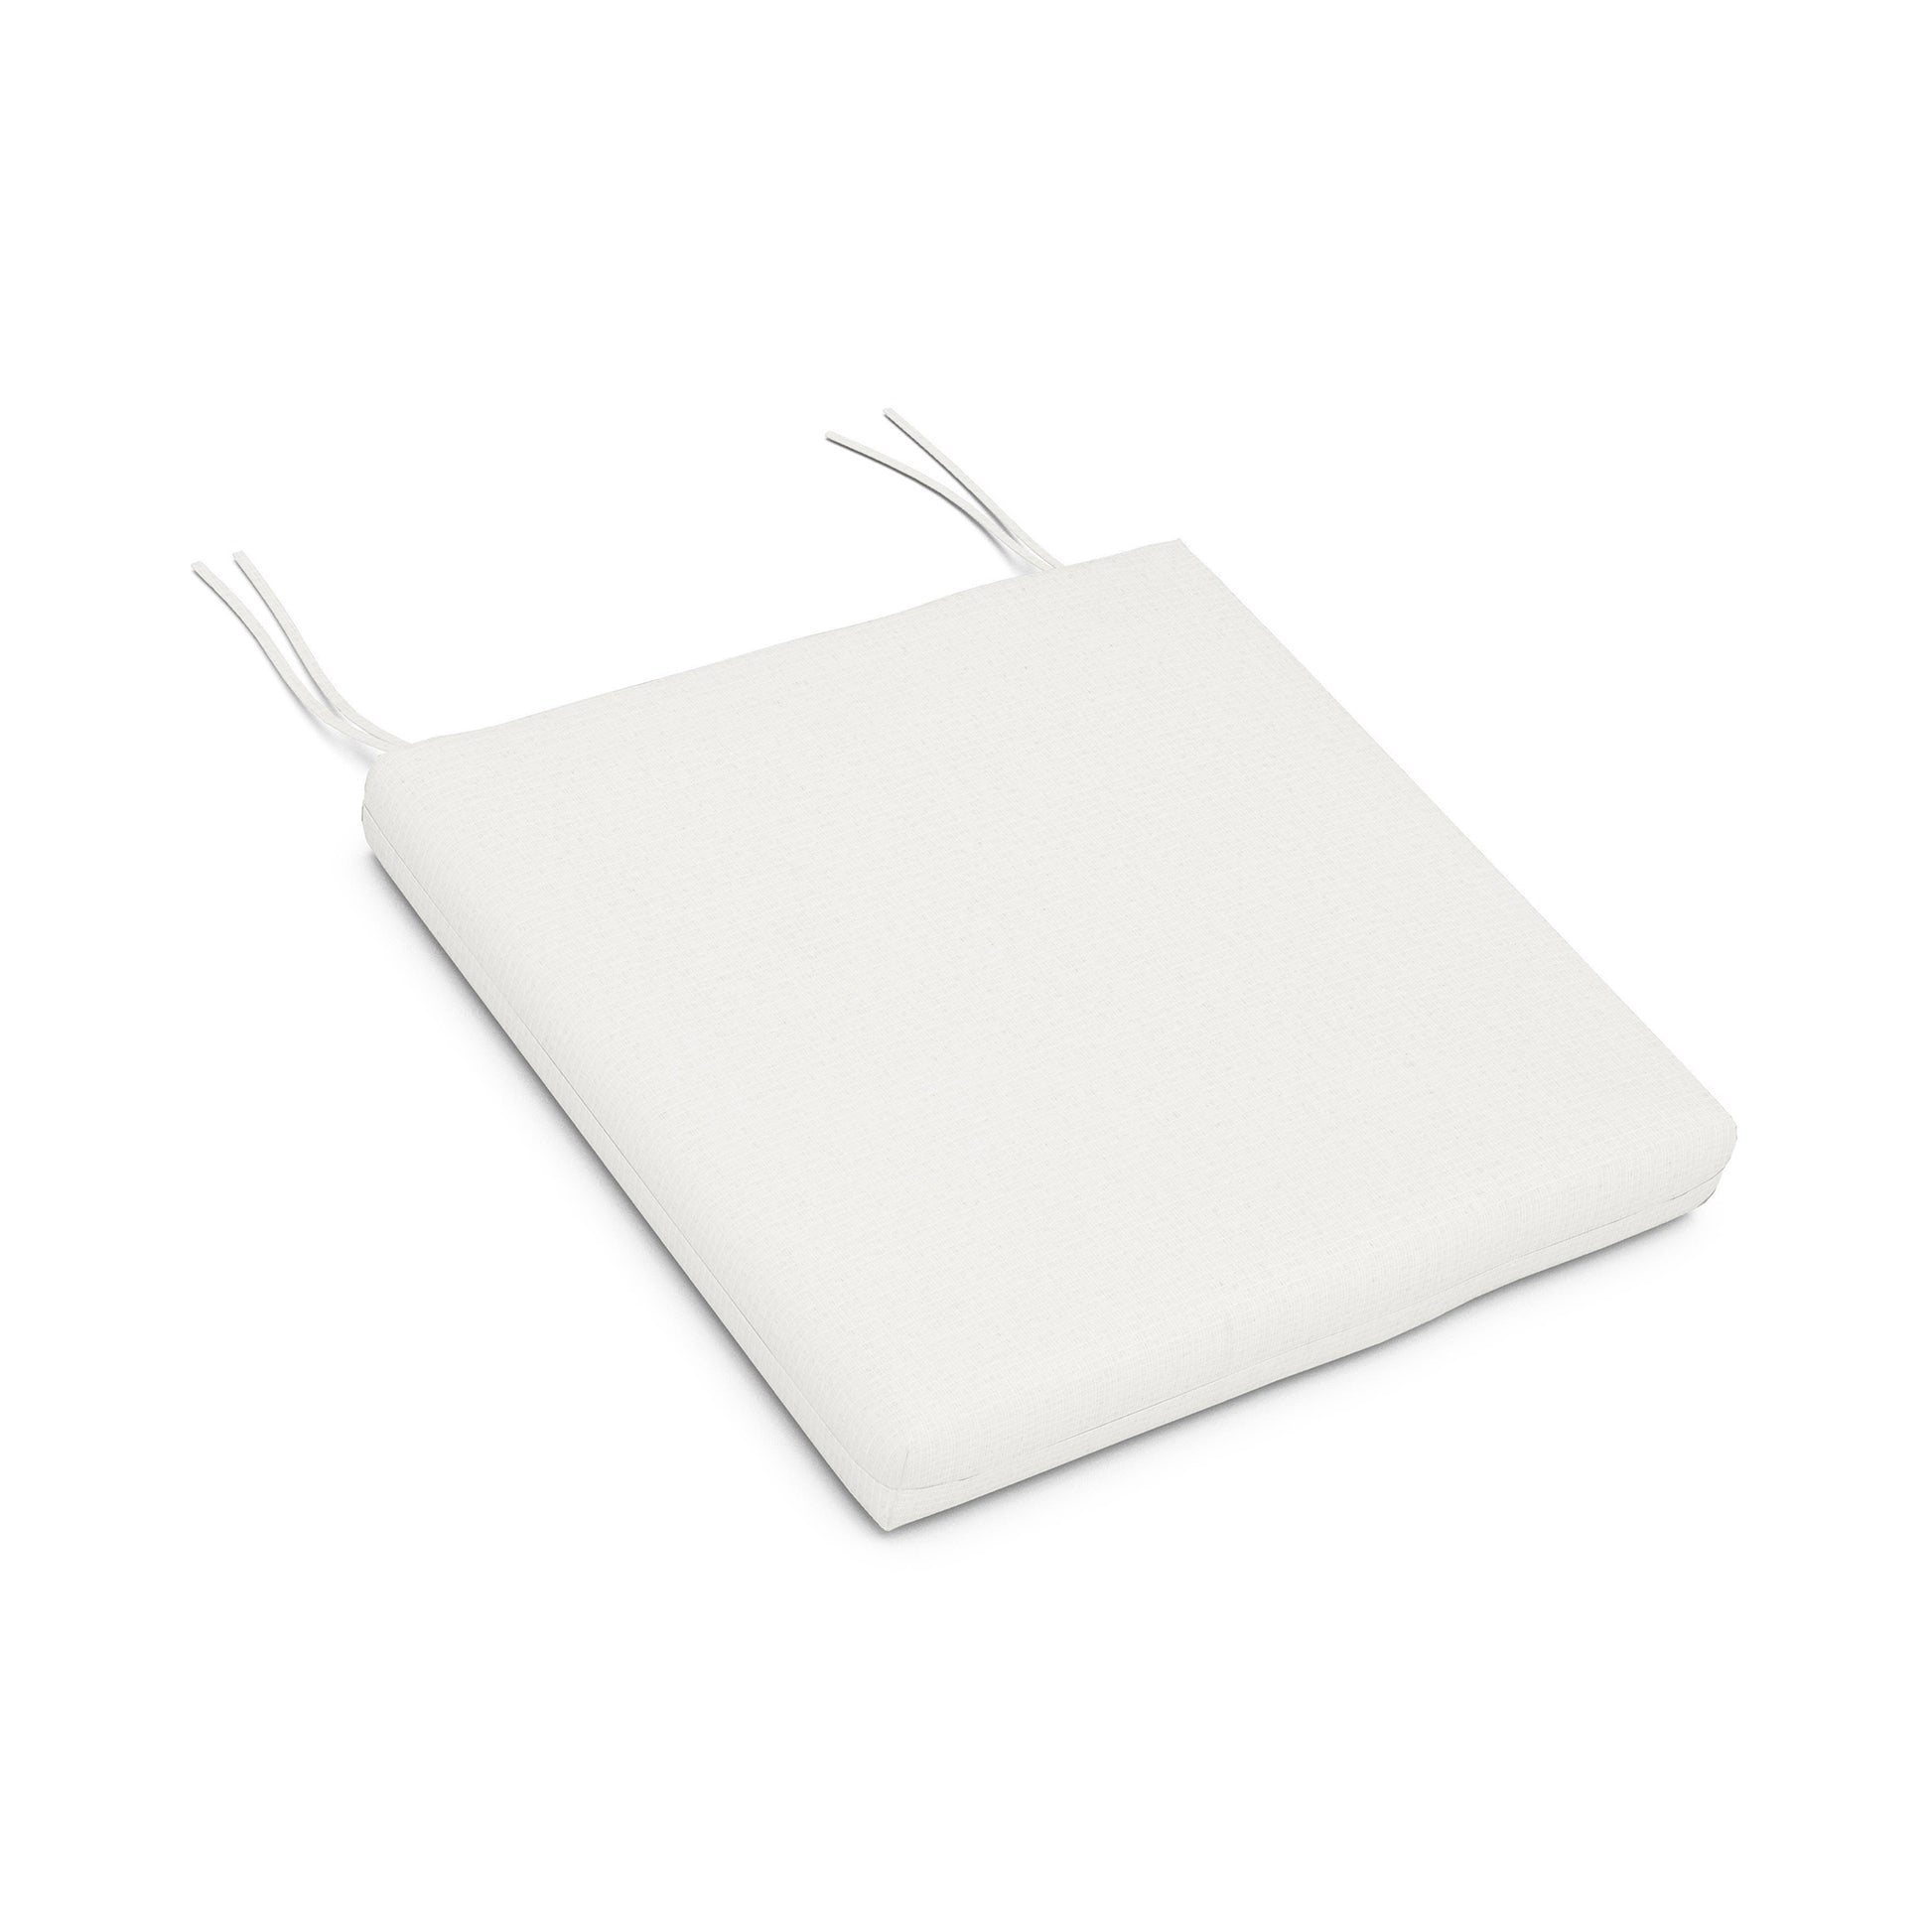 A plain white POLYWOOD® XPWS0172 seat cushion with two protruding straps, displayed on a white background.